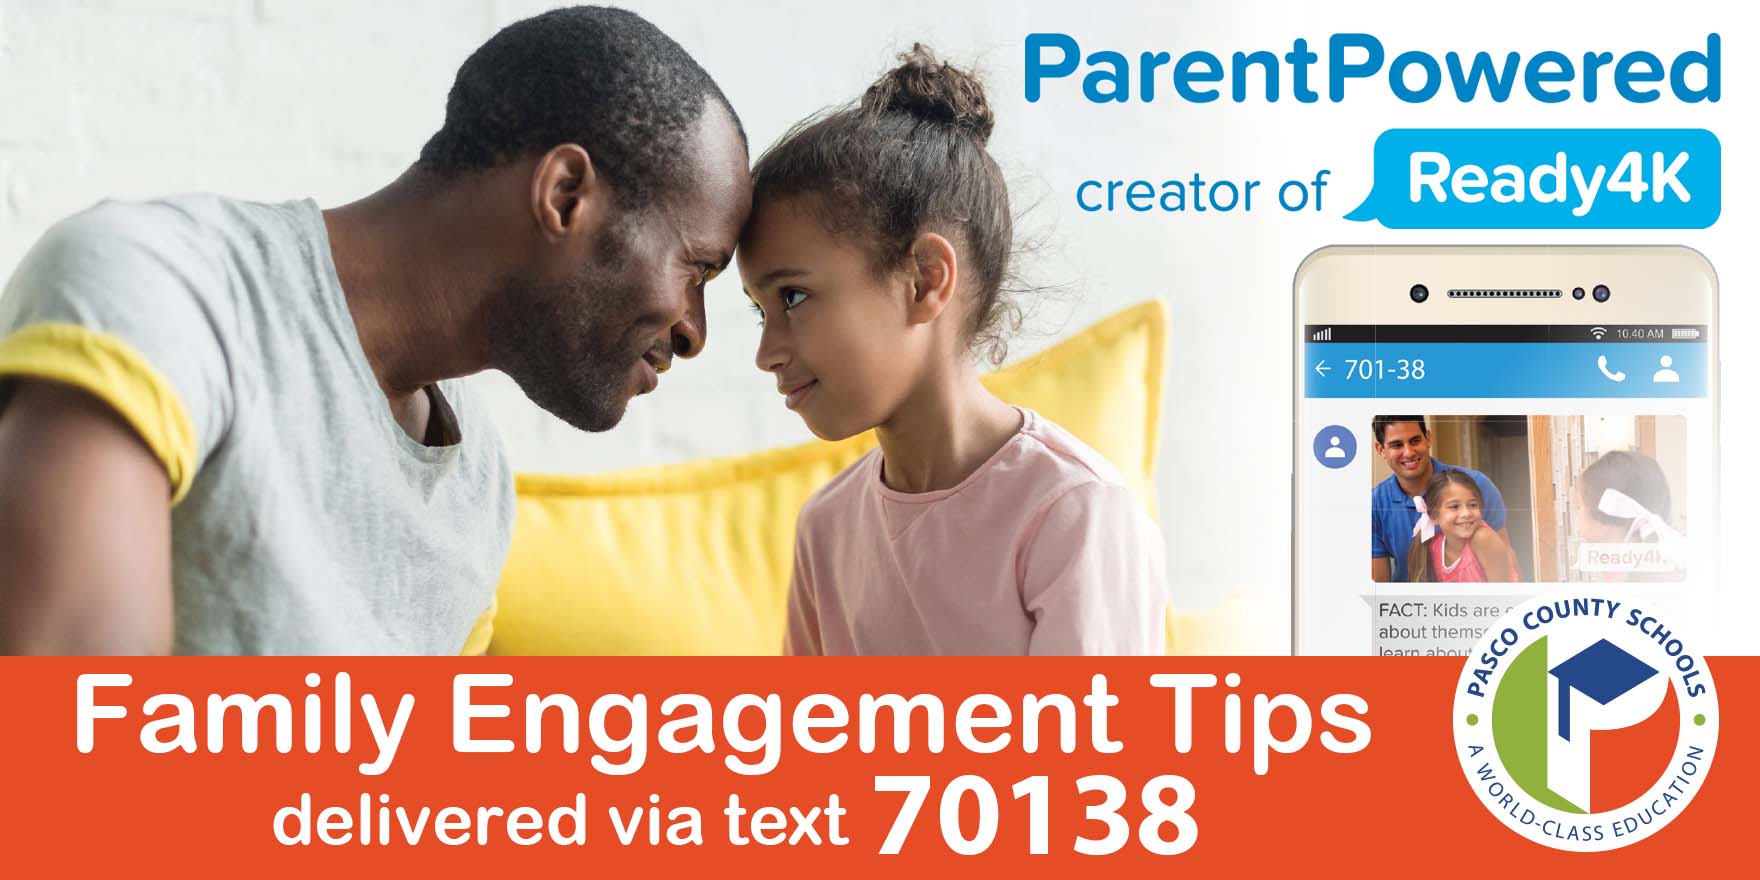 ParentPowered, creator of Ready4K, family engagement tips delivered via text 70138